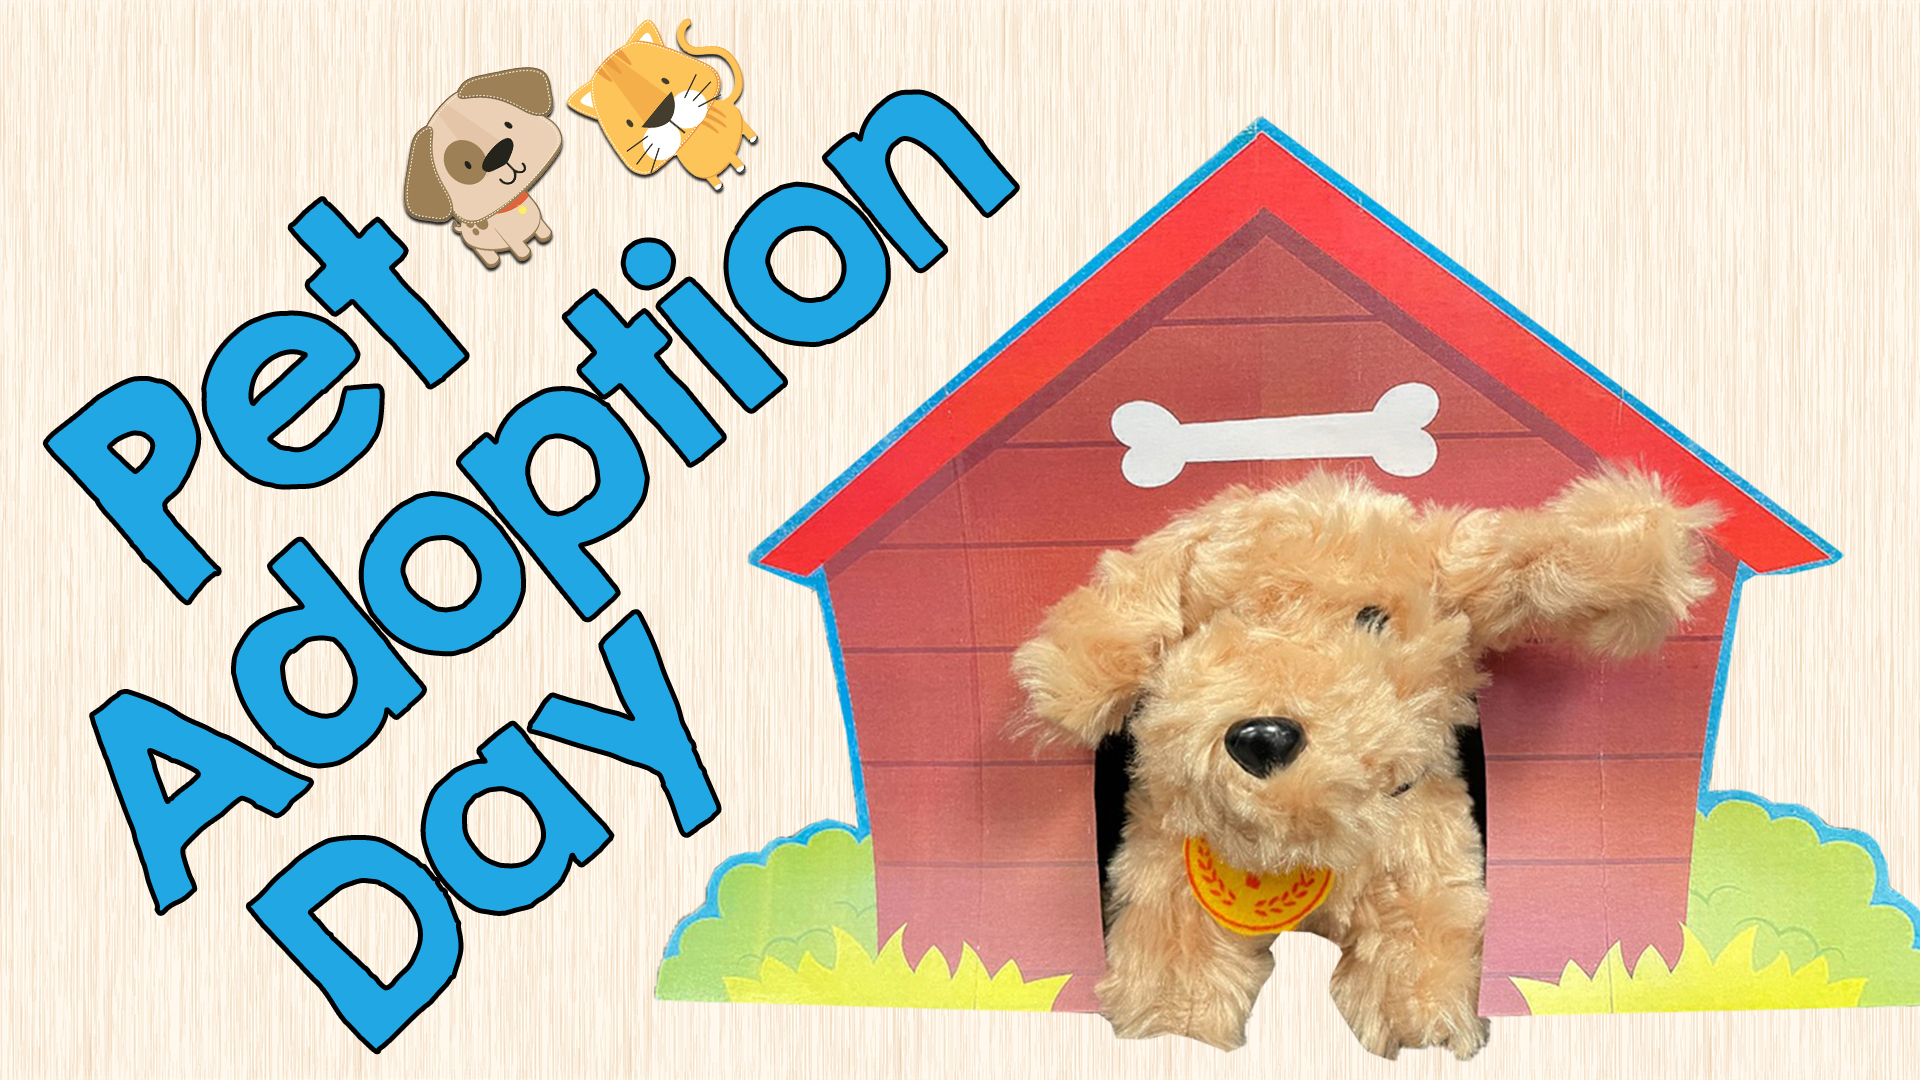 Image reads "Pet Adoption Day" against a light wood background. A stuffed animal dog in a dog house is to the right of the title.